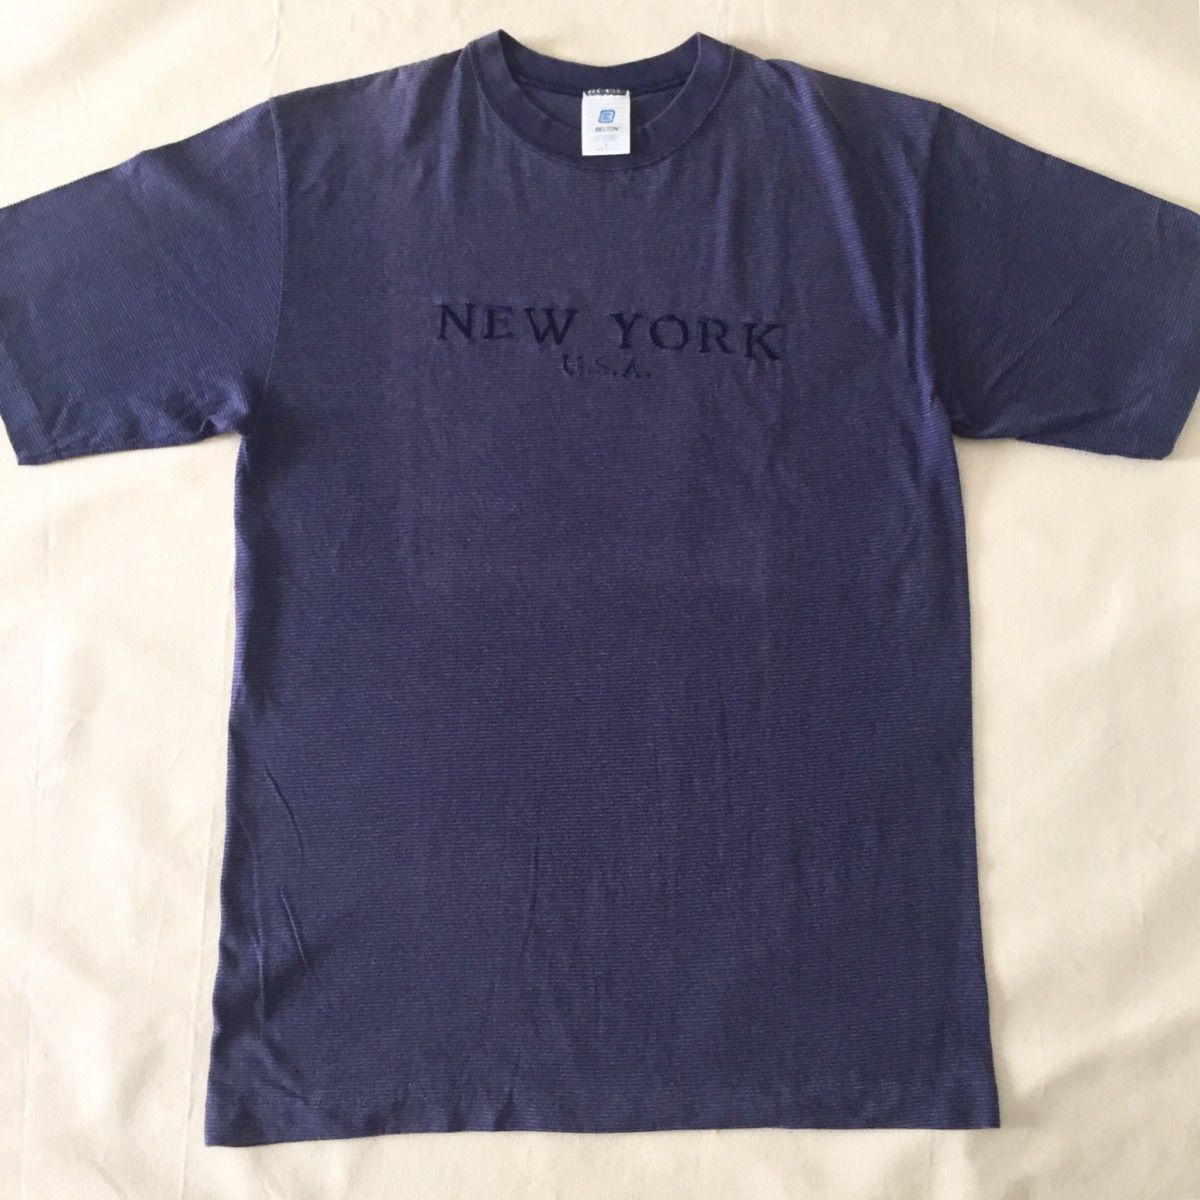 Vintage Authentic Vintage 1990s New York Belton Embroidery Tee NYC ...